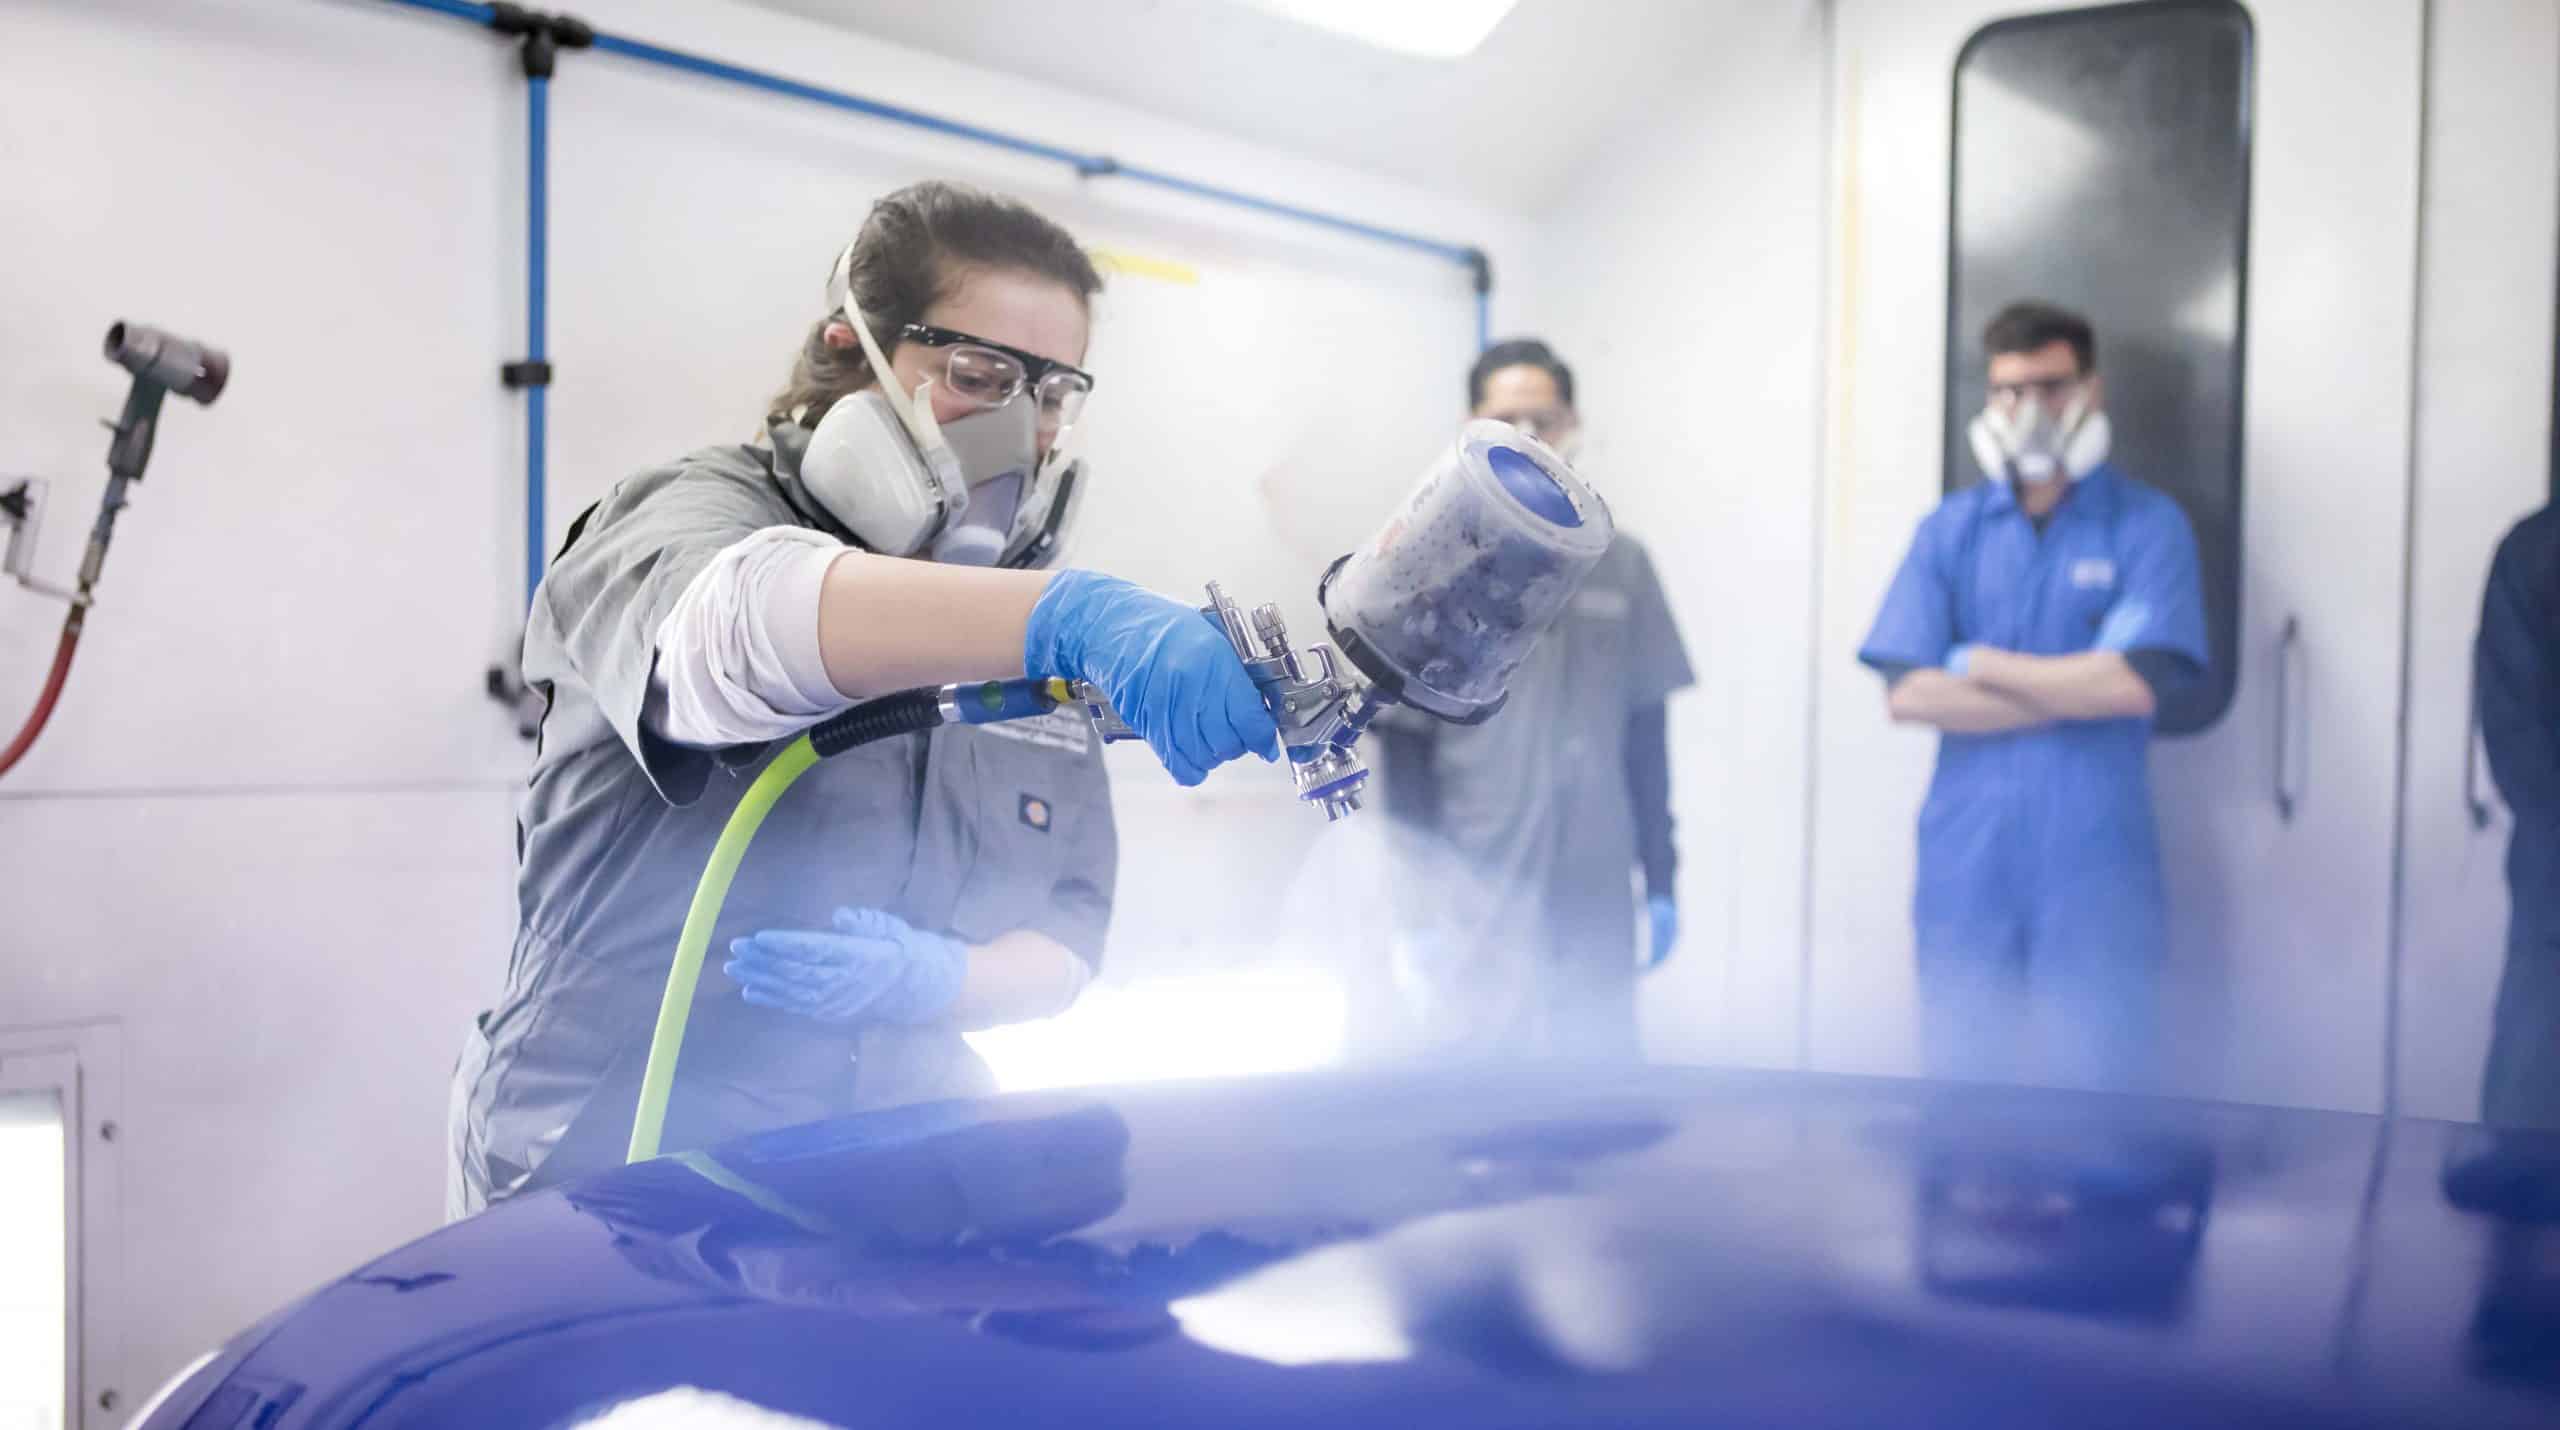 OTC student refinishes the hood of a car